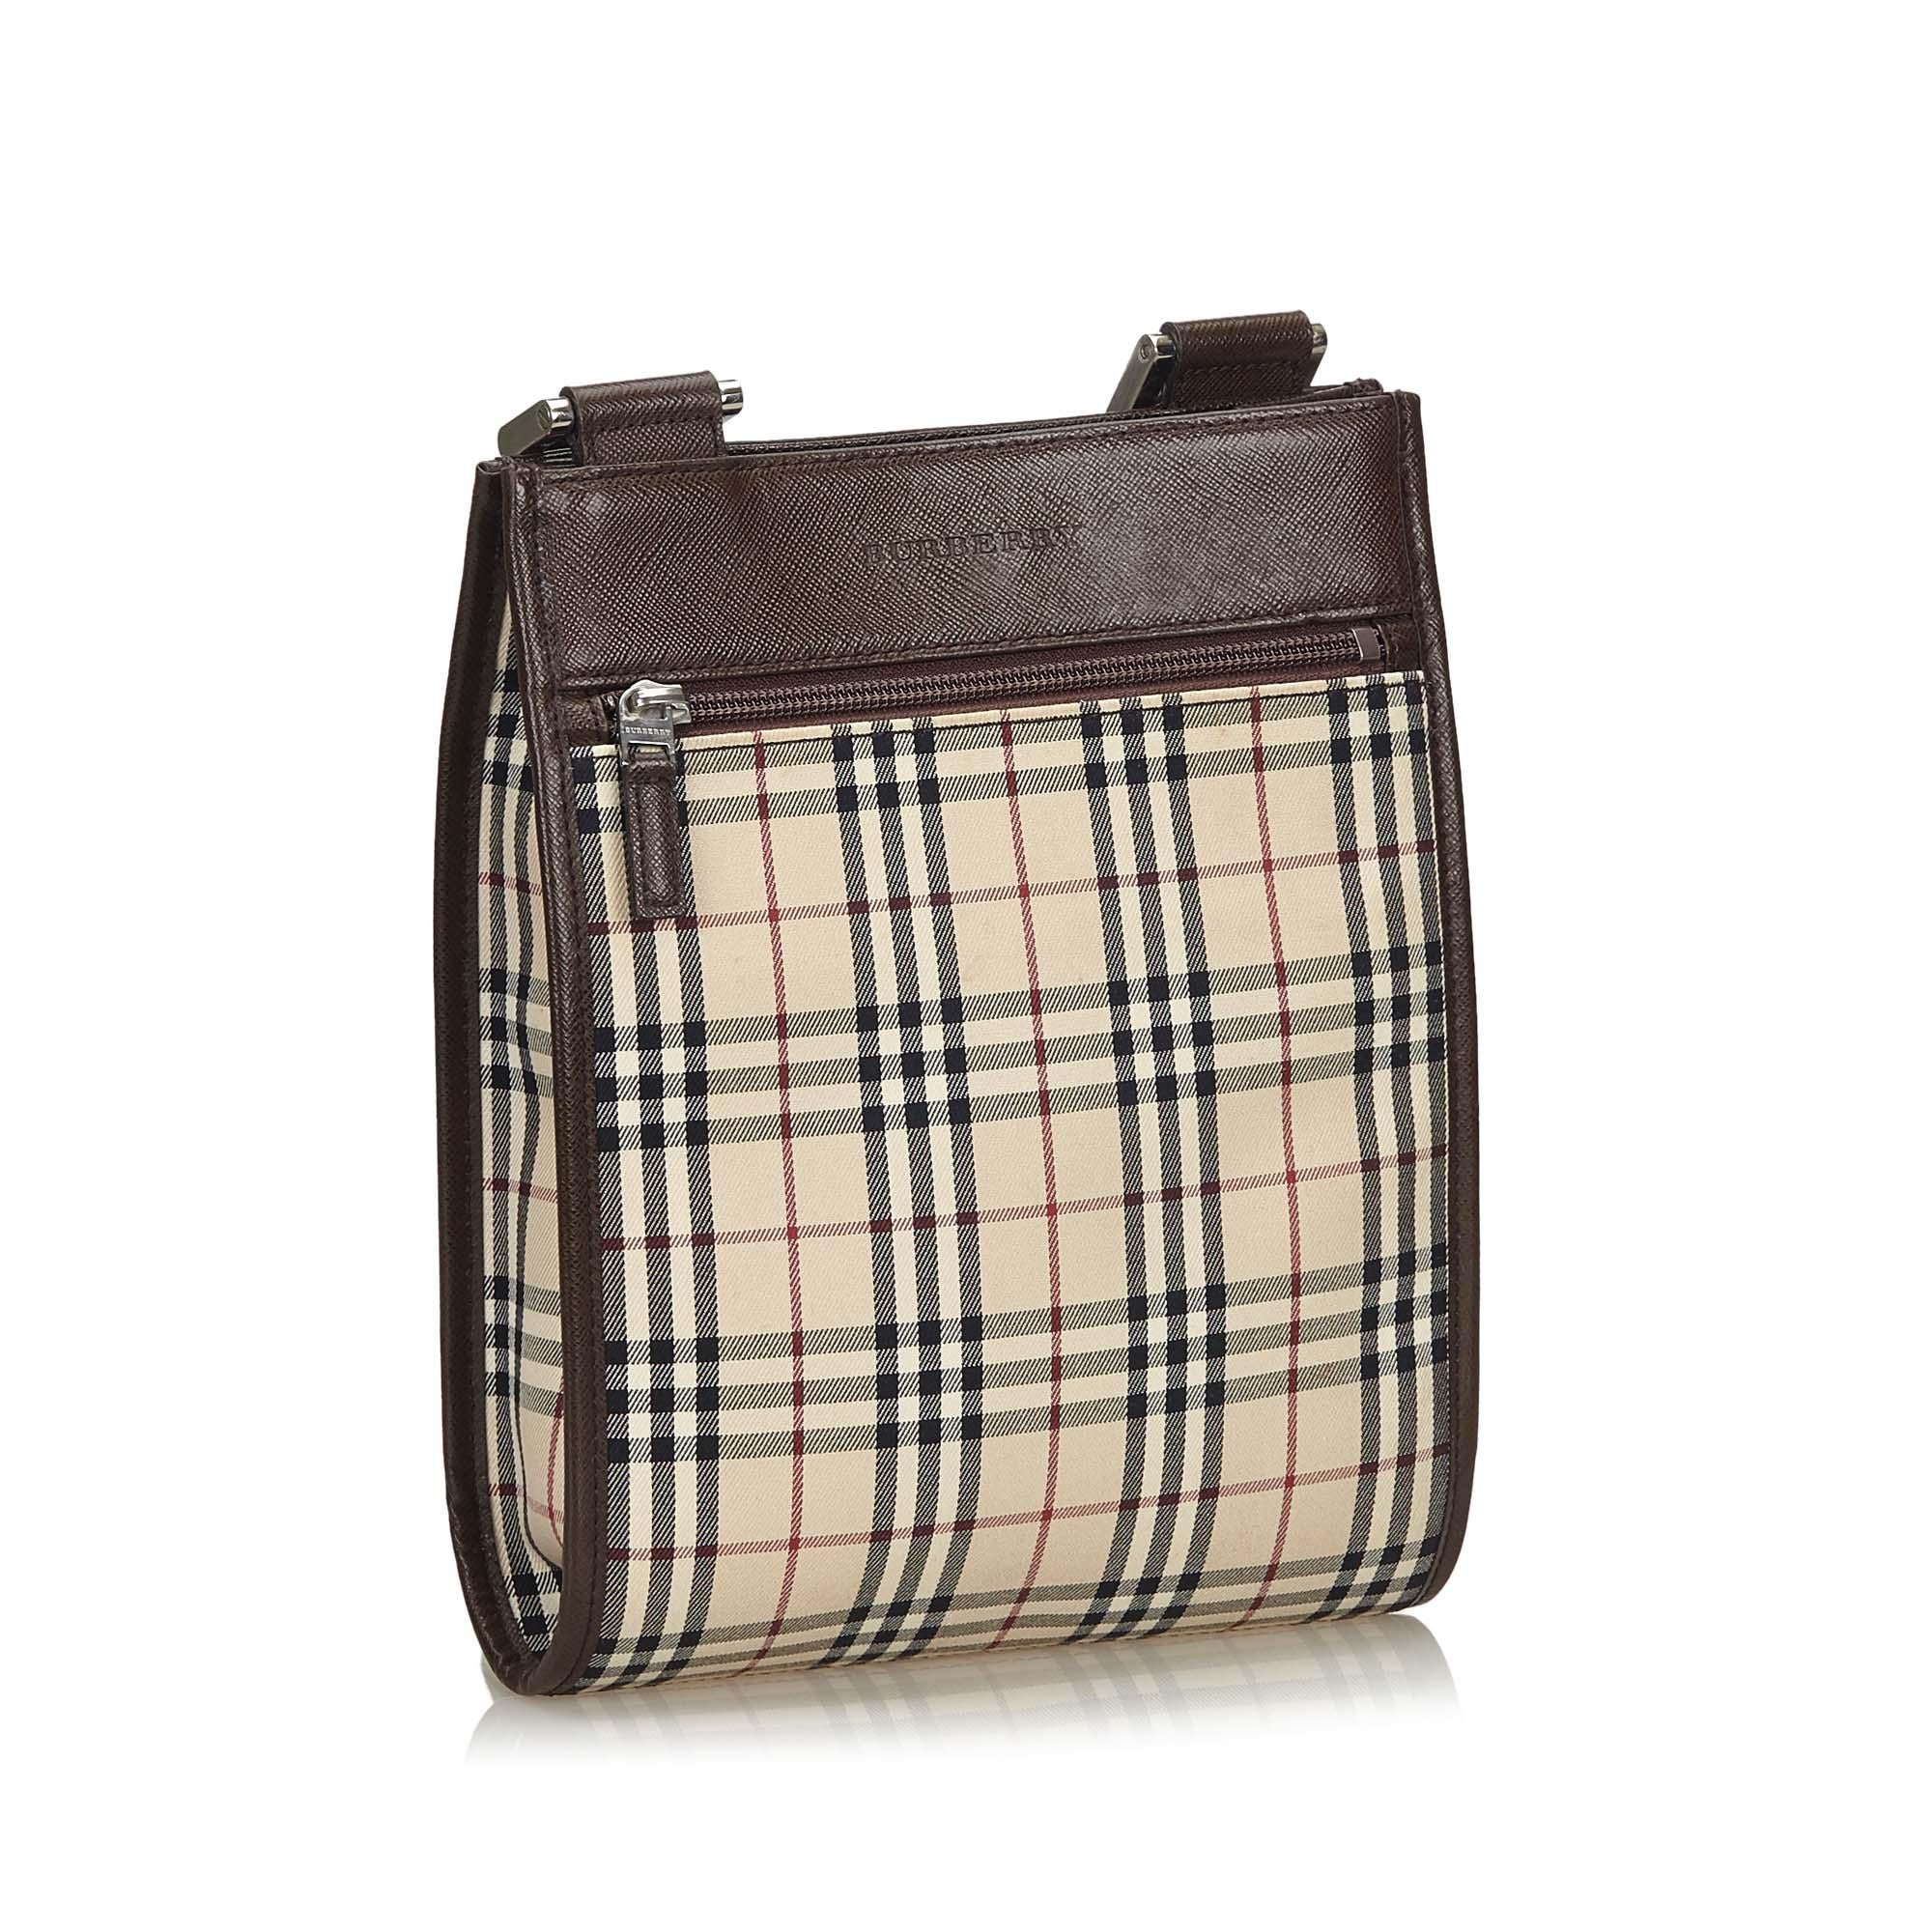 This crossbody bag features a plaid nylon body with leather trim, a front exterior zip pocket, an adjustable flat strap, an open top with a magnetic closure, and interior zip and slip pockets. It carries as AB condition rating.

Inclusions: 
This